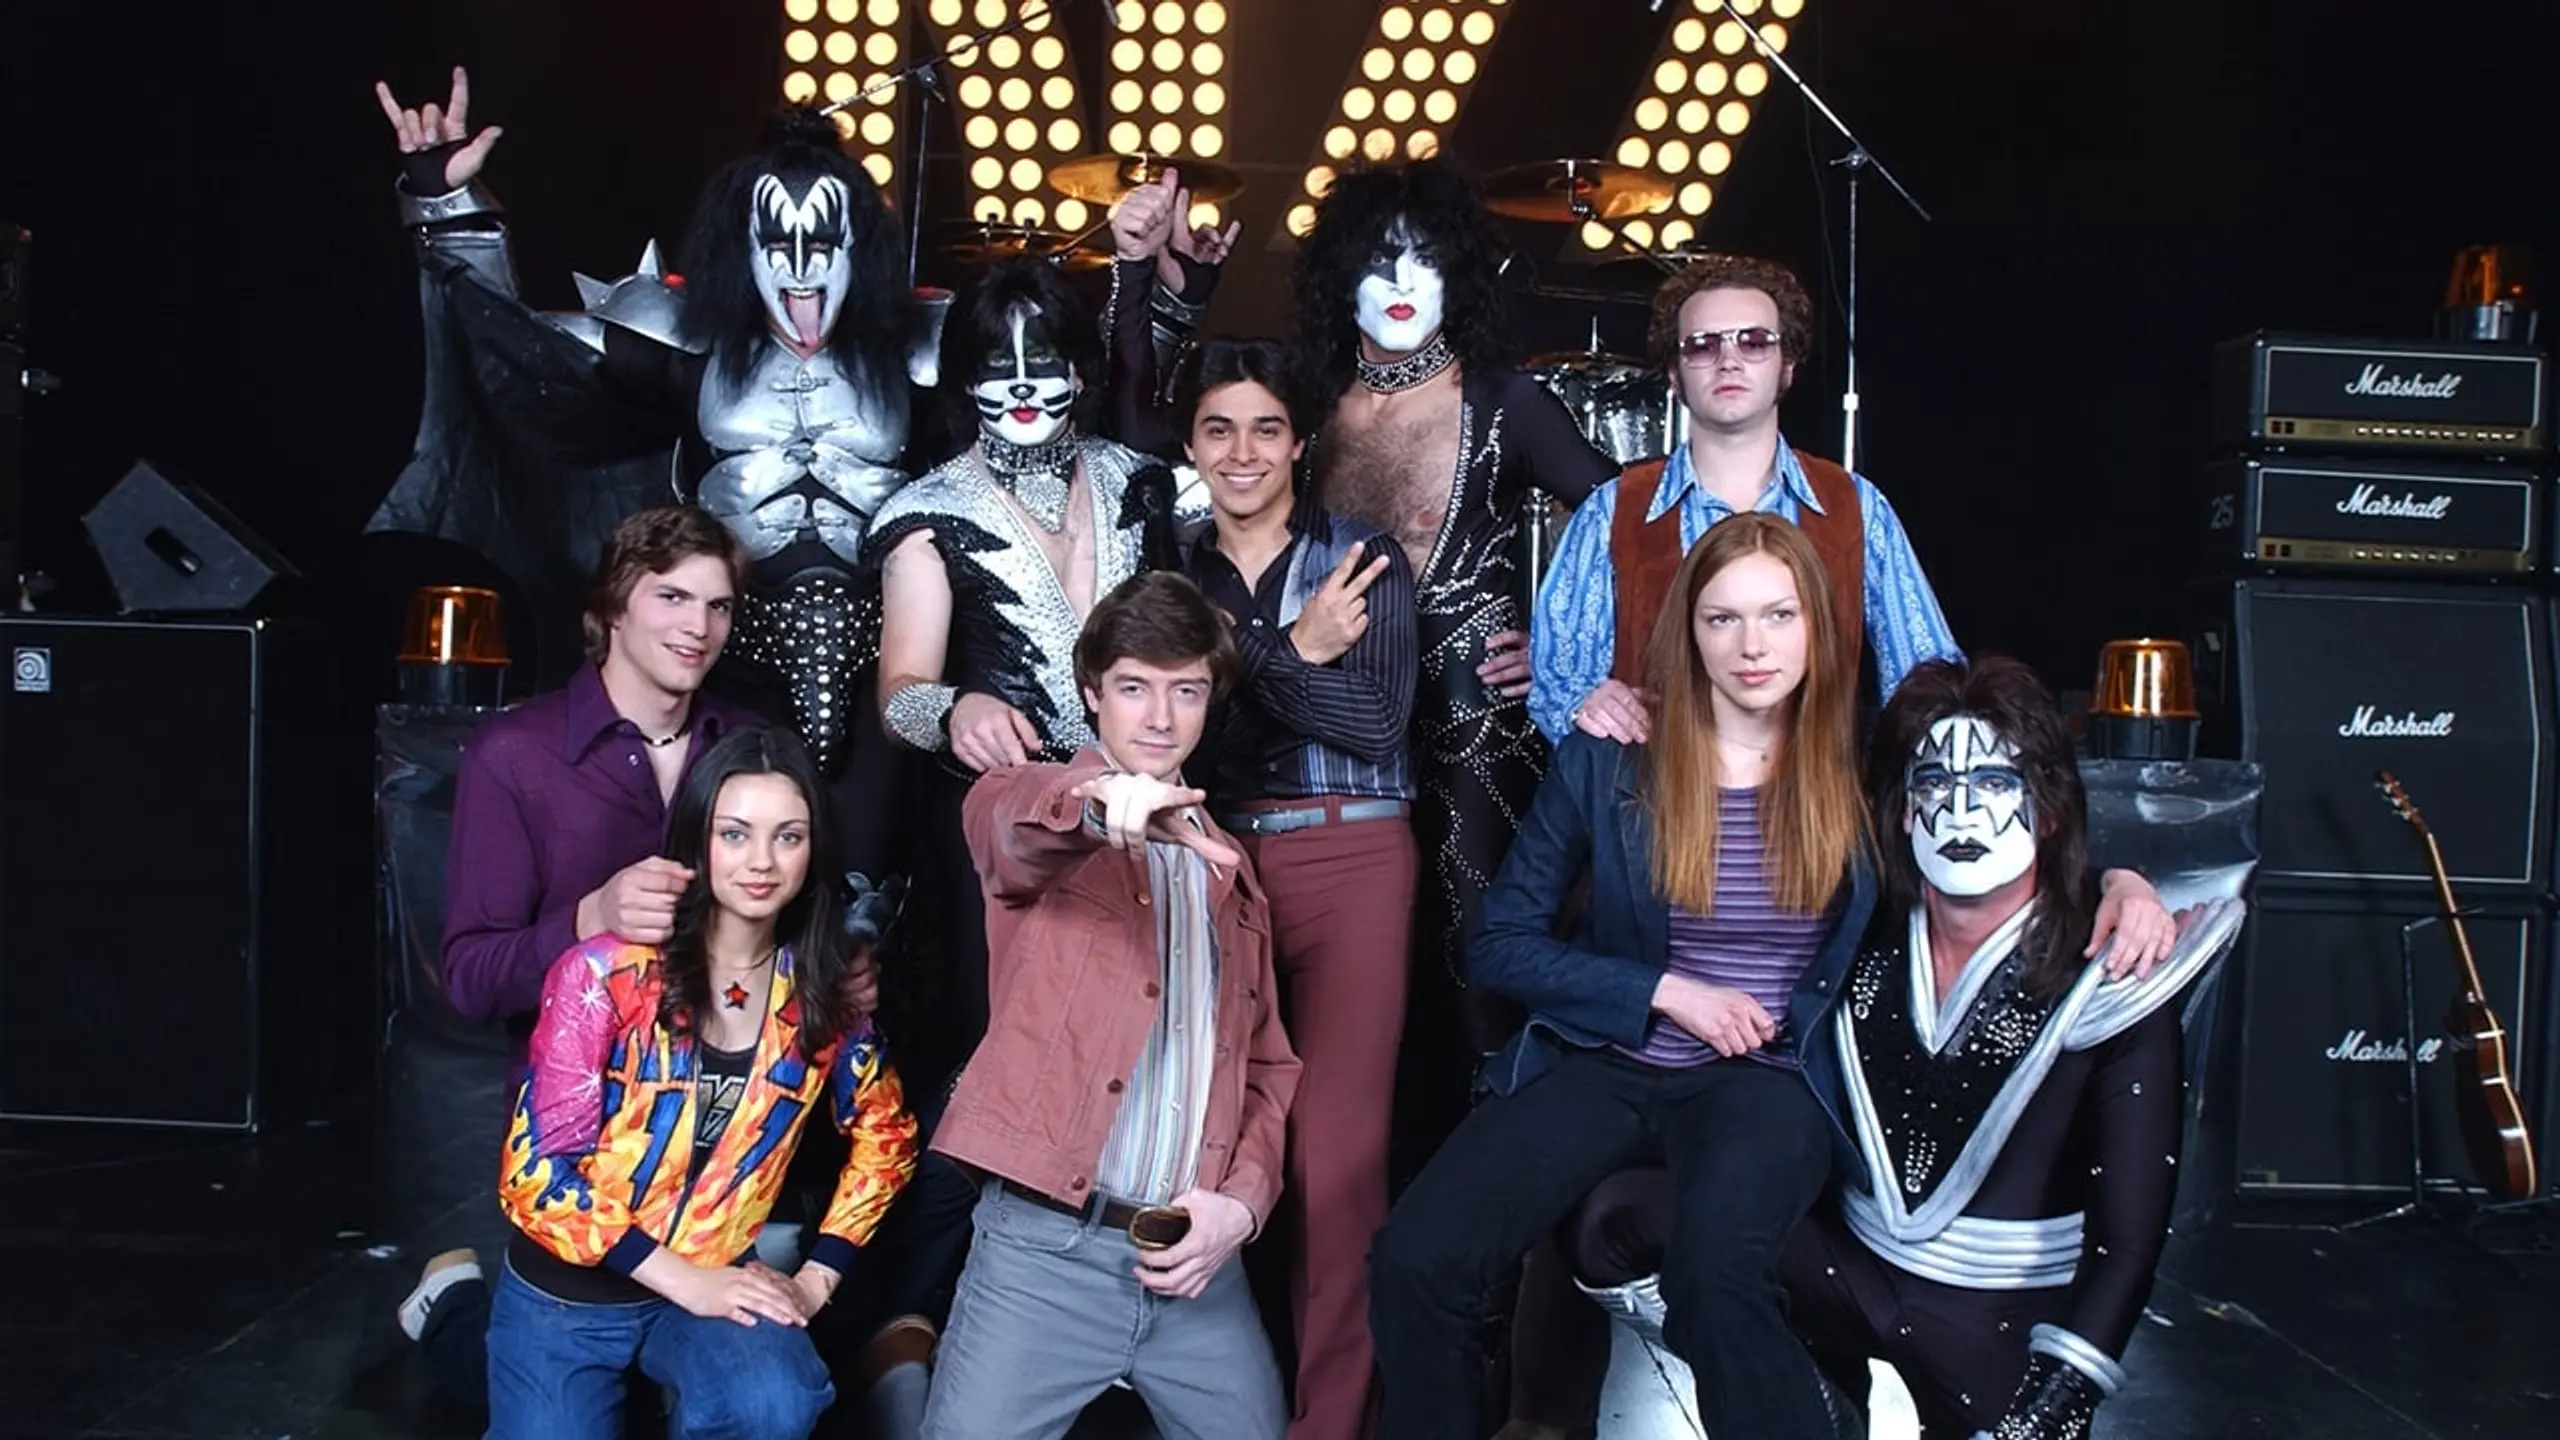 That '70s KISS Show